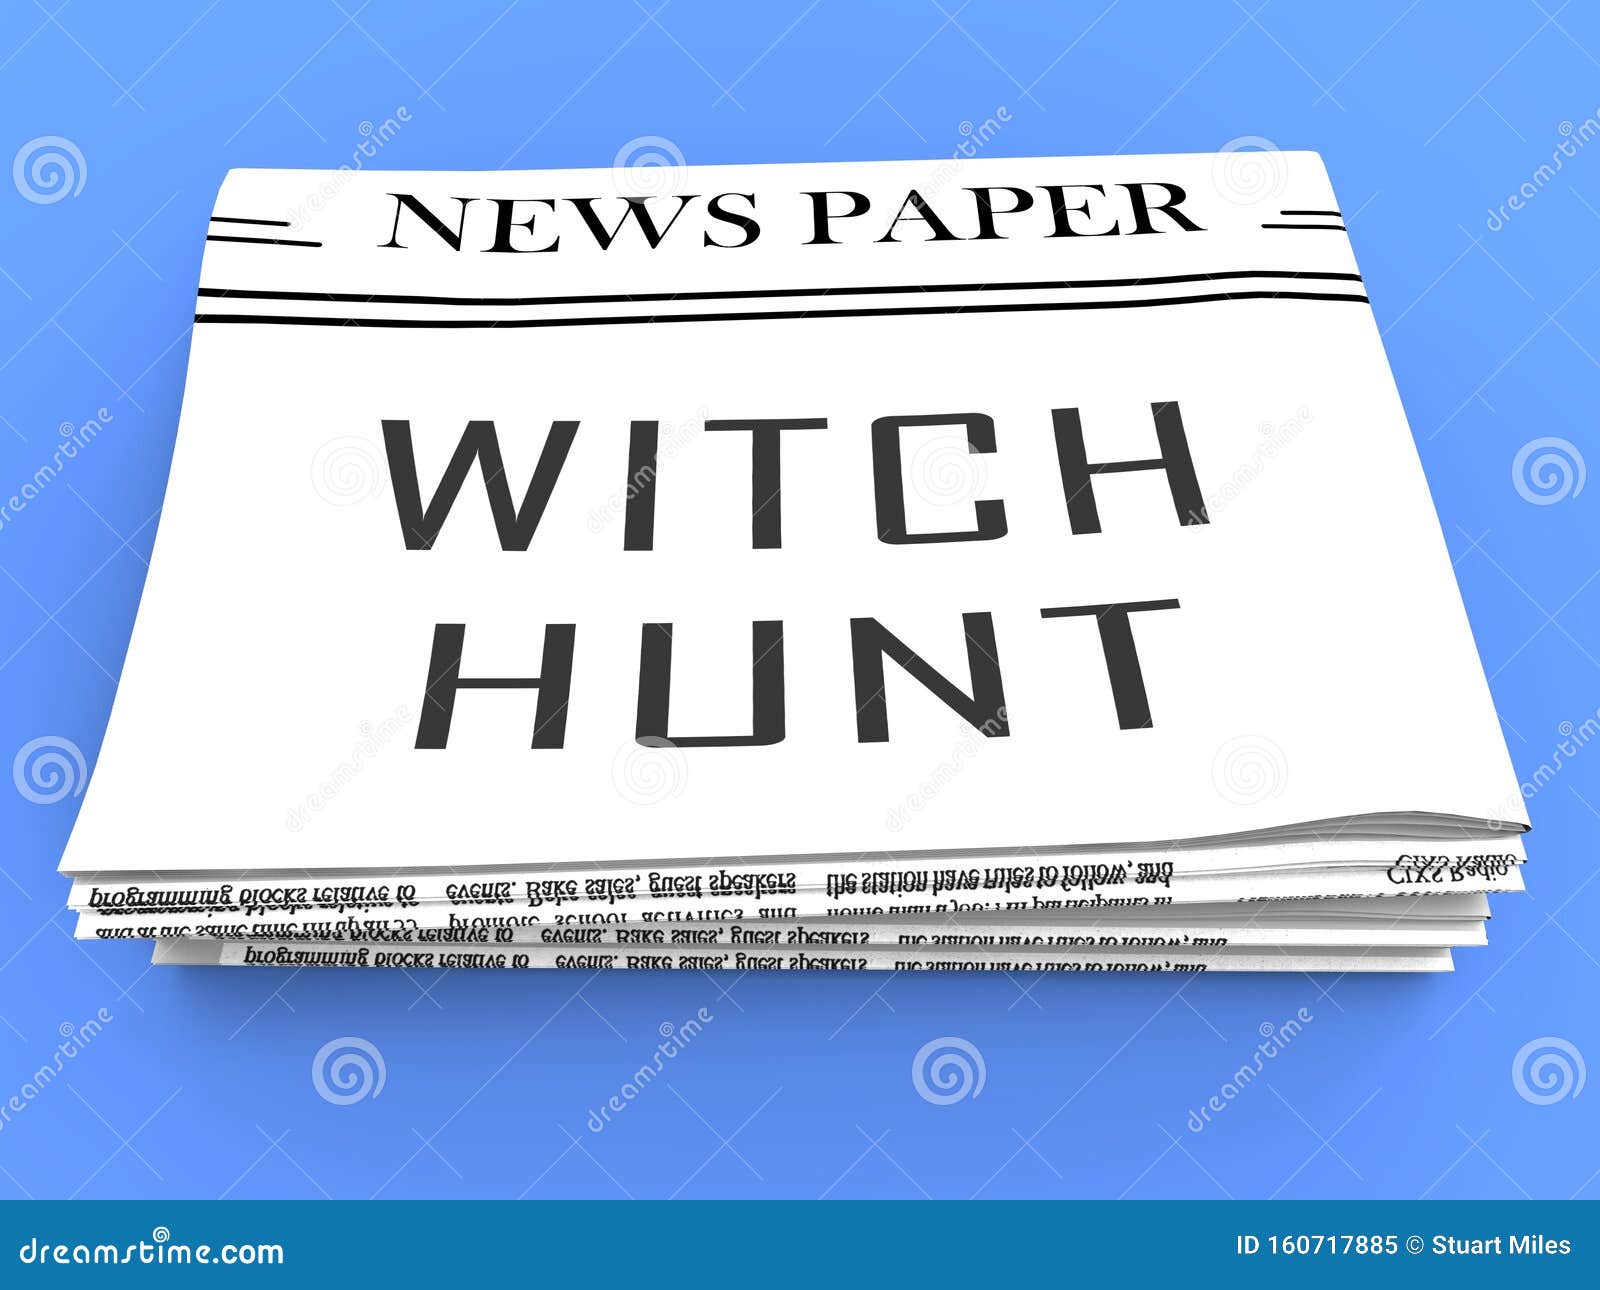 witch hunt newspaper meaning harassment or bullying to threaten or persecute 3d 